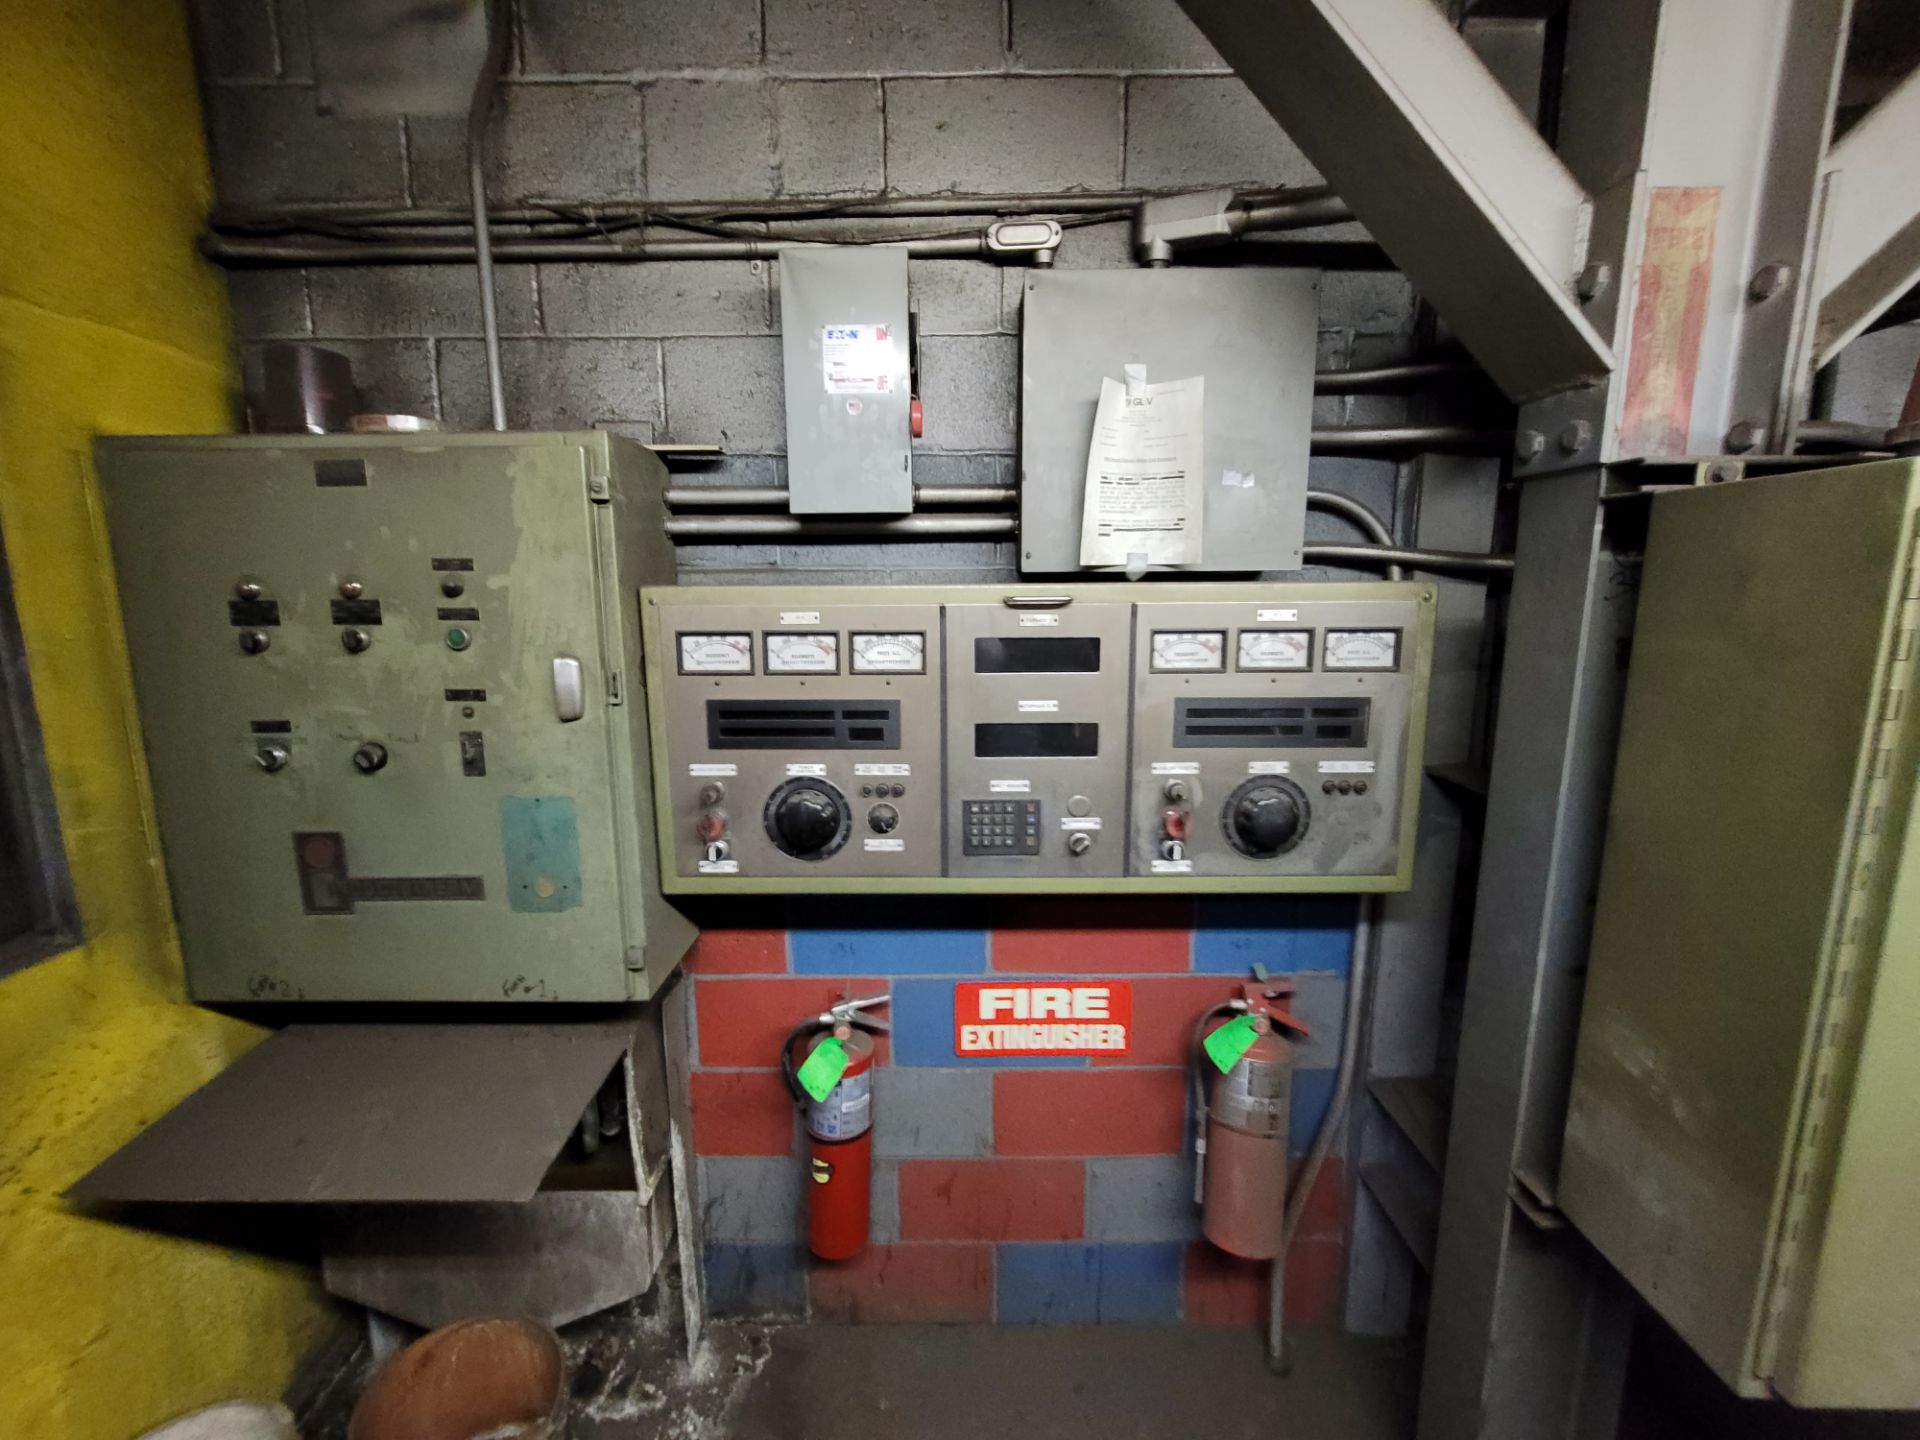 1998 Inductotherm Furnace System with (2) 7.5 Ton Furnaces - Image 3 of 12